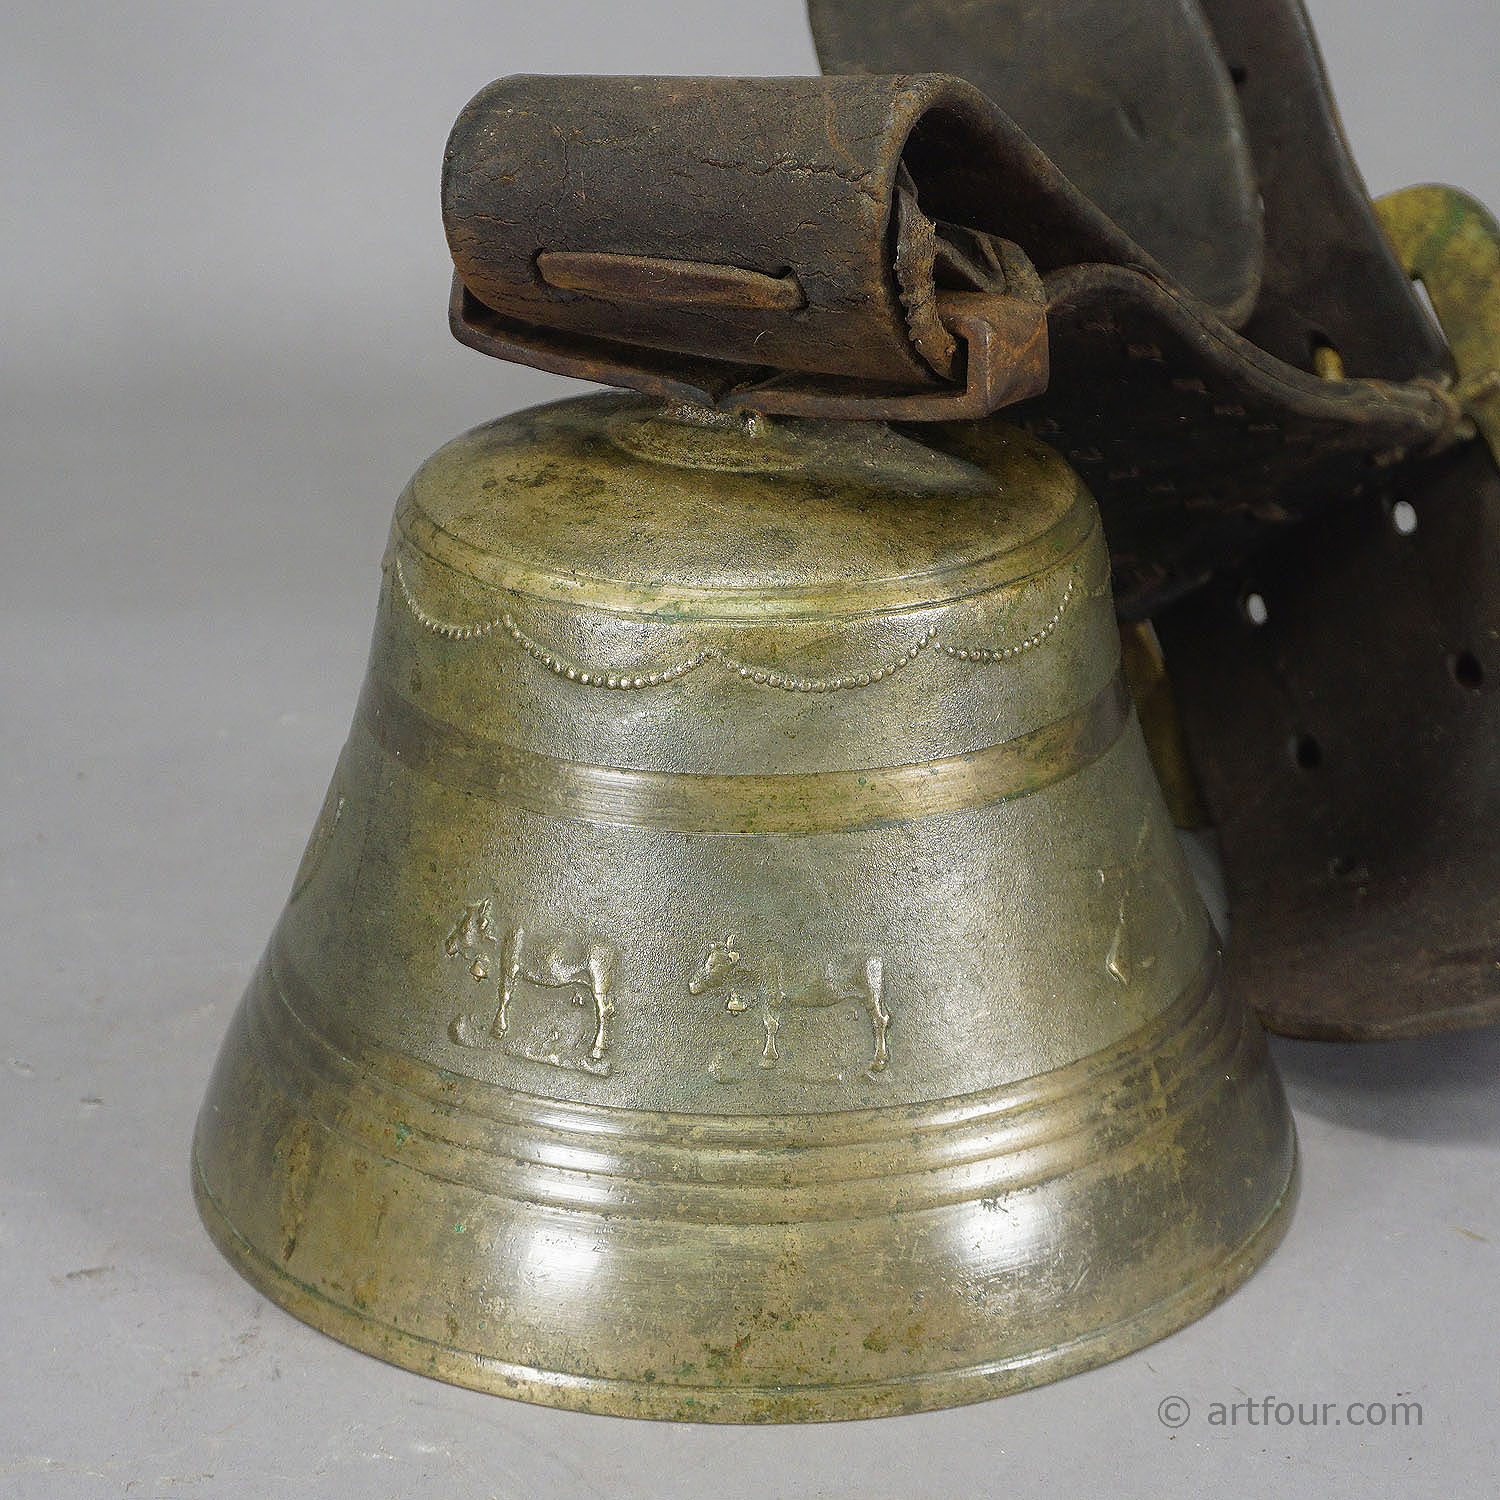 Antique Swiss Casted Bronze Cattle Bell with Leather Strap ca. 1900